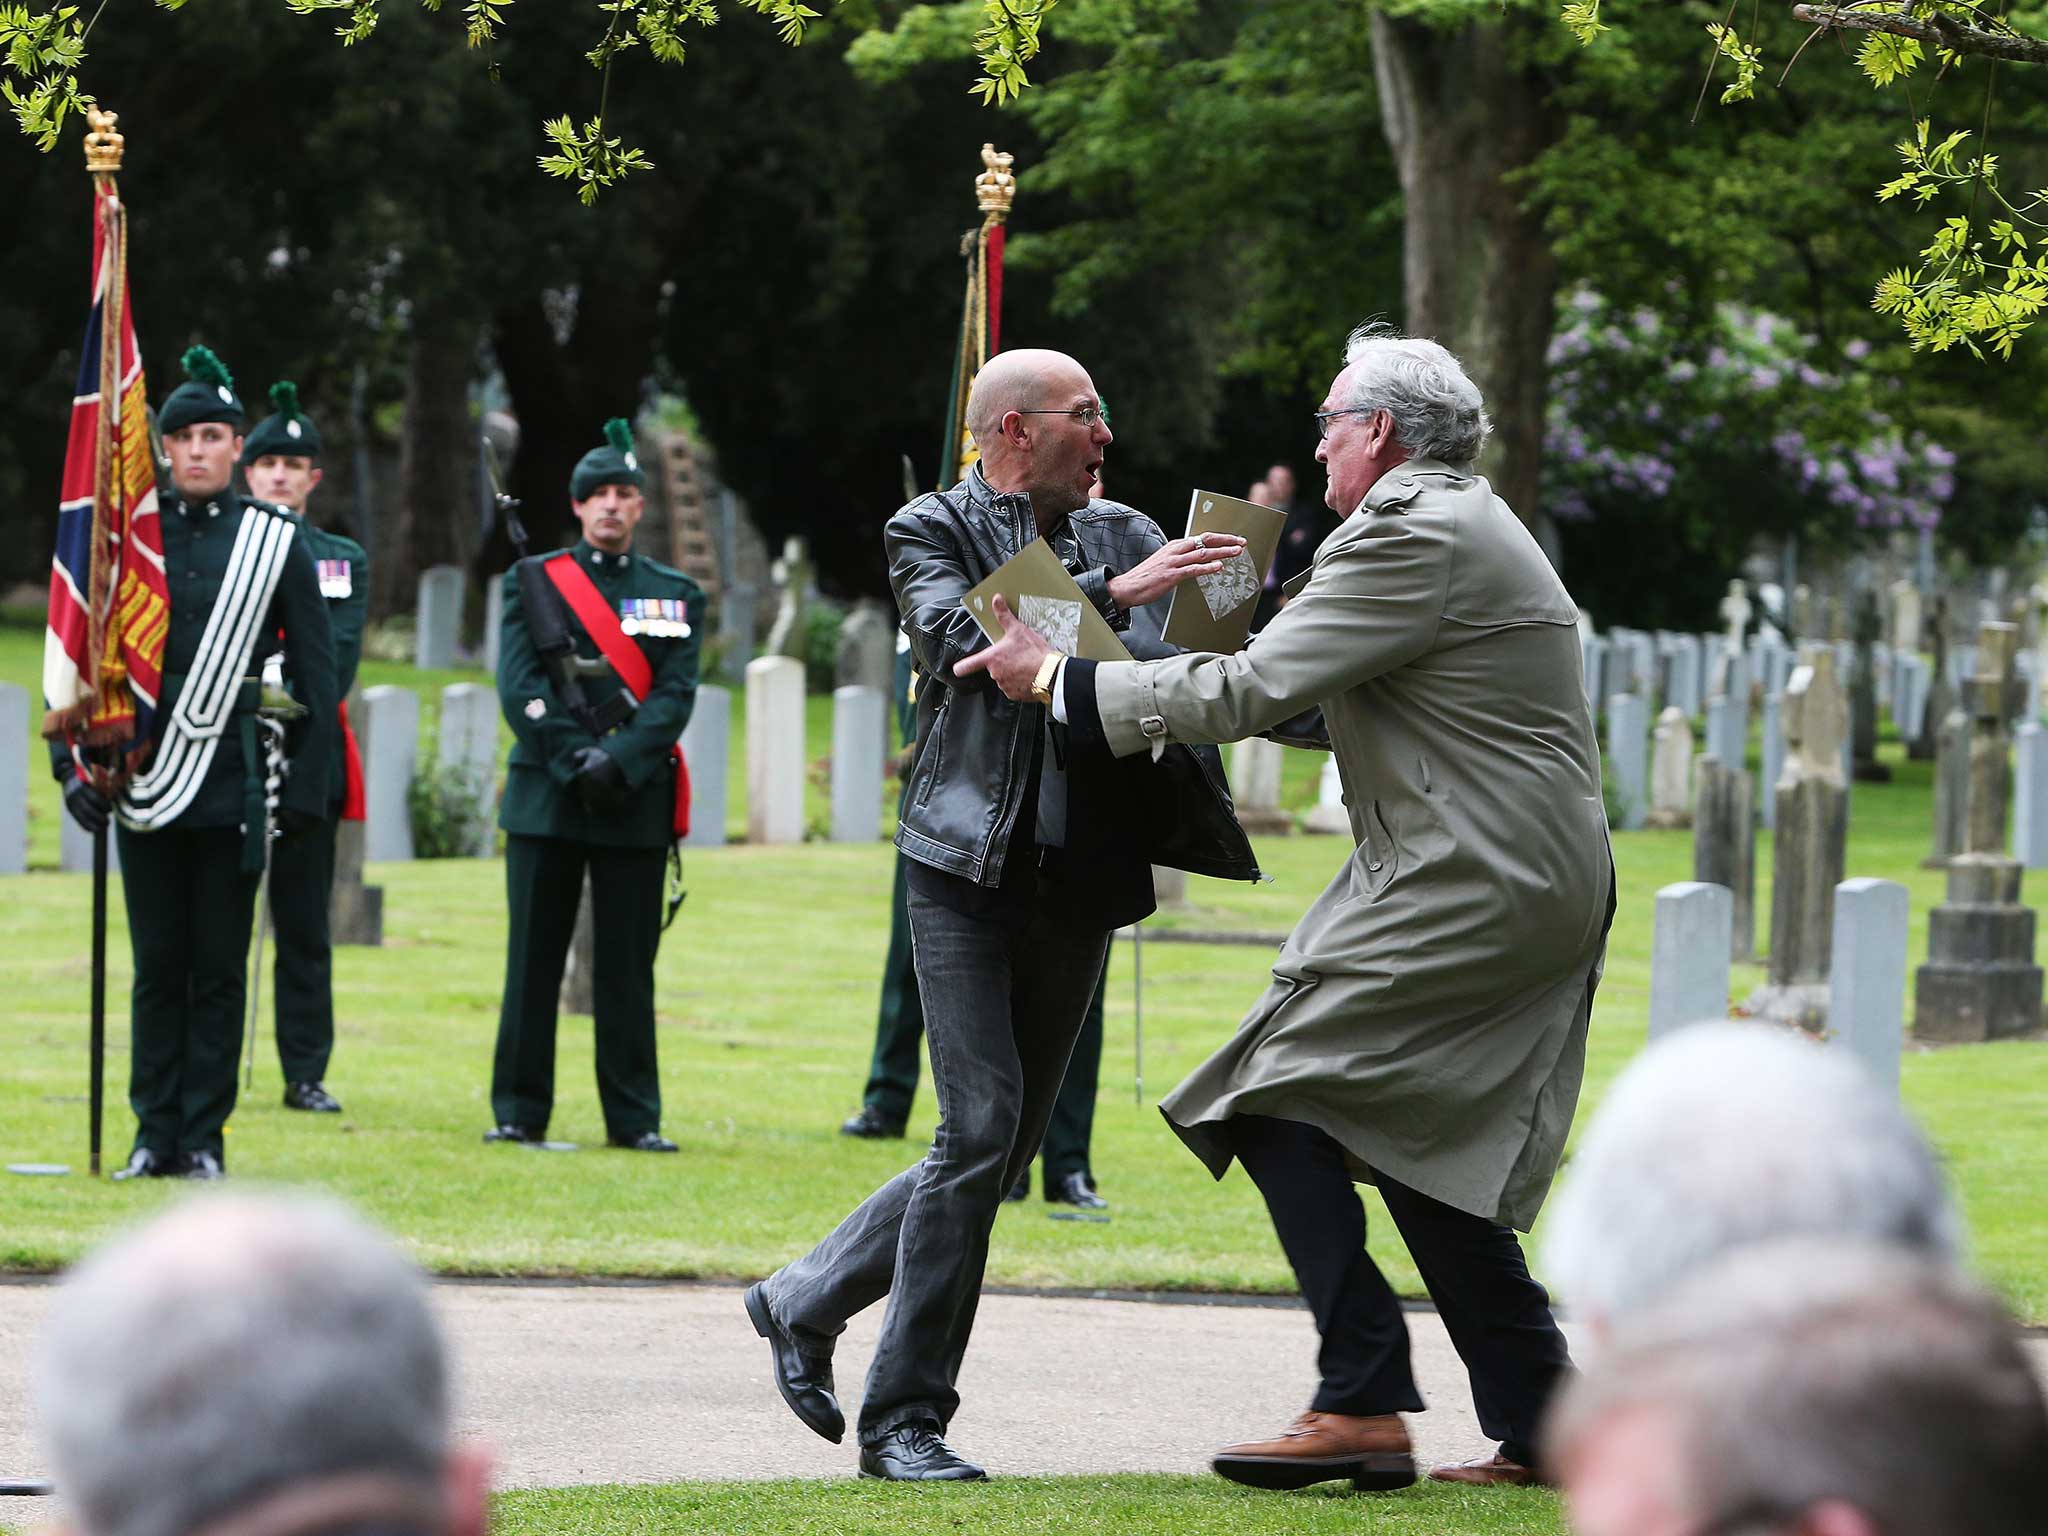 Canadian Ambassador to Ireland Kevin Vickers wrestles with a protester (right) during a State ceremony to remember the British soldiers who died during the Easter Rising at Grangegorman Military Cemetery, Dublin.